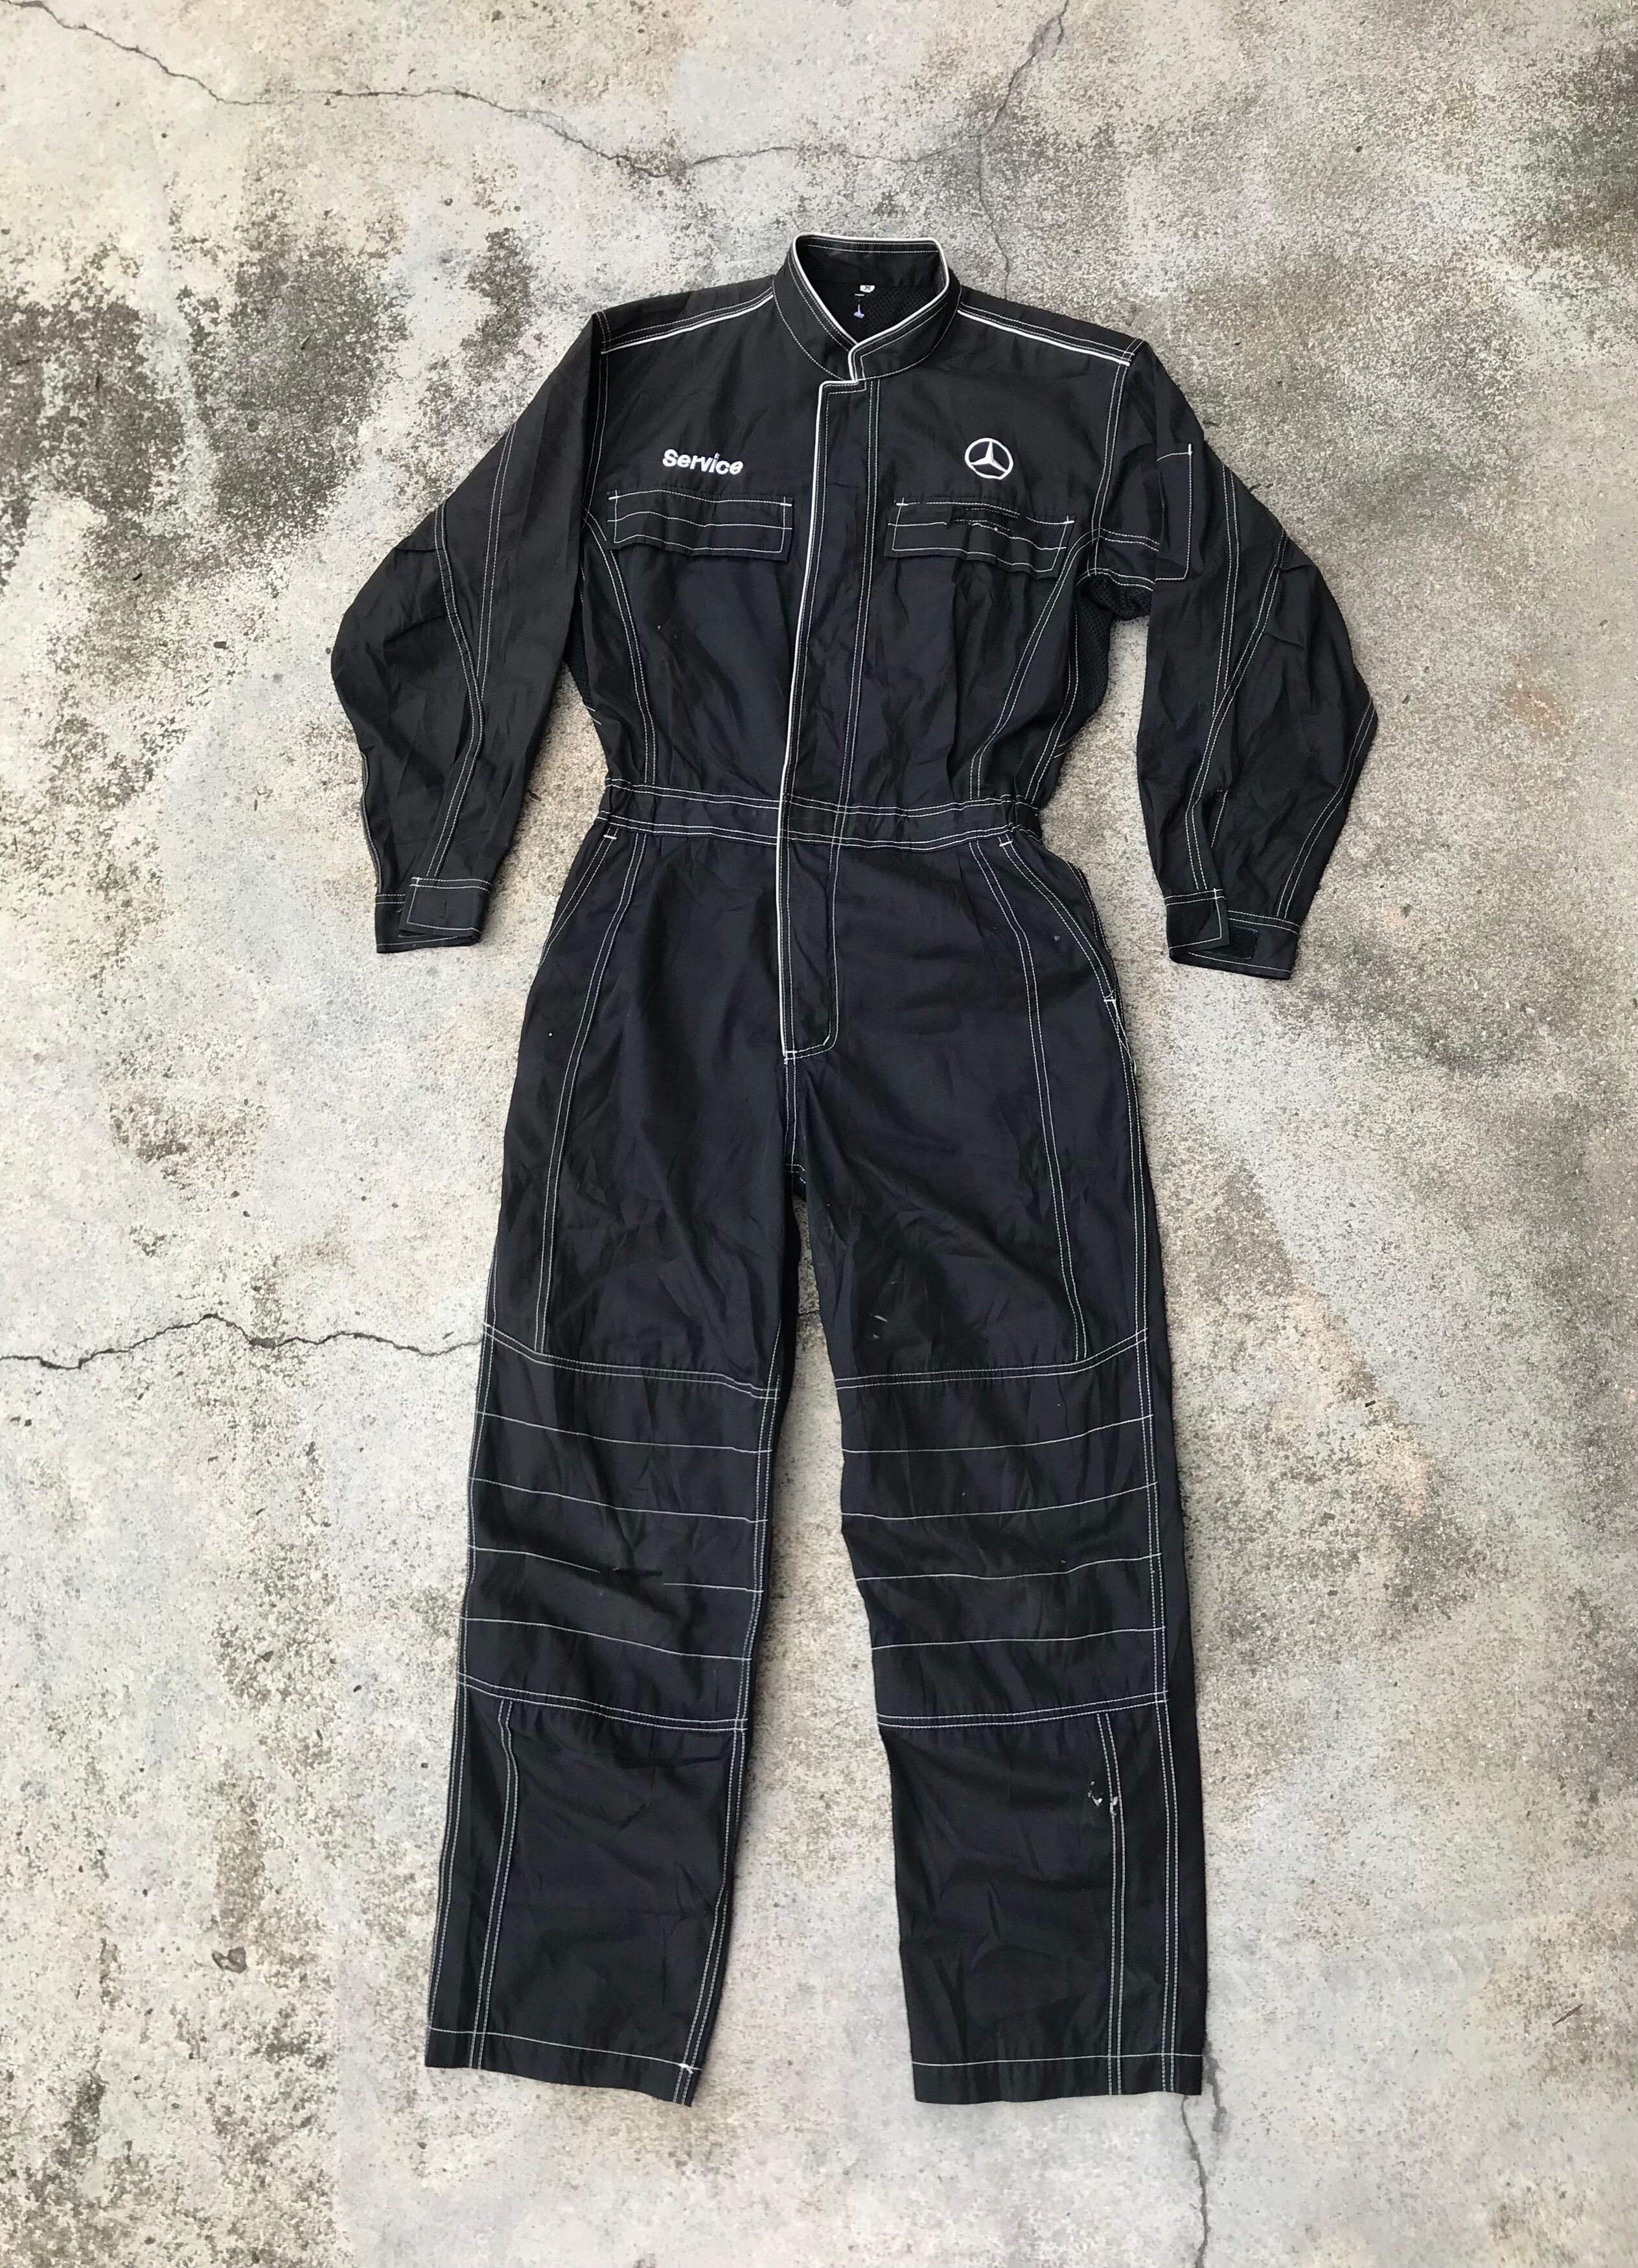 Vintage Mercedes Benz Distressed Overalls Coveralls Size US 31 - 1 Preview